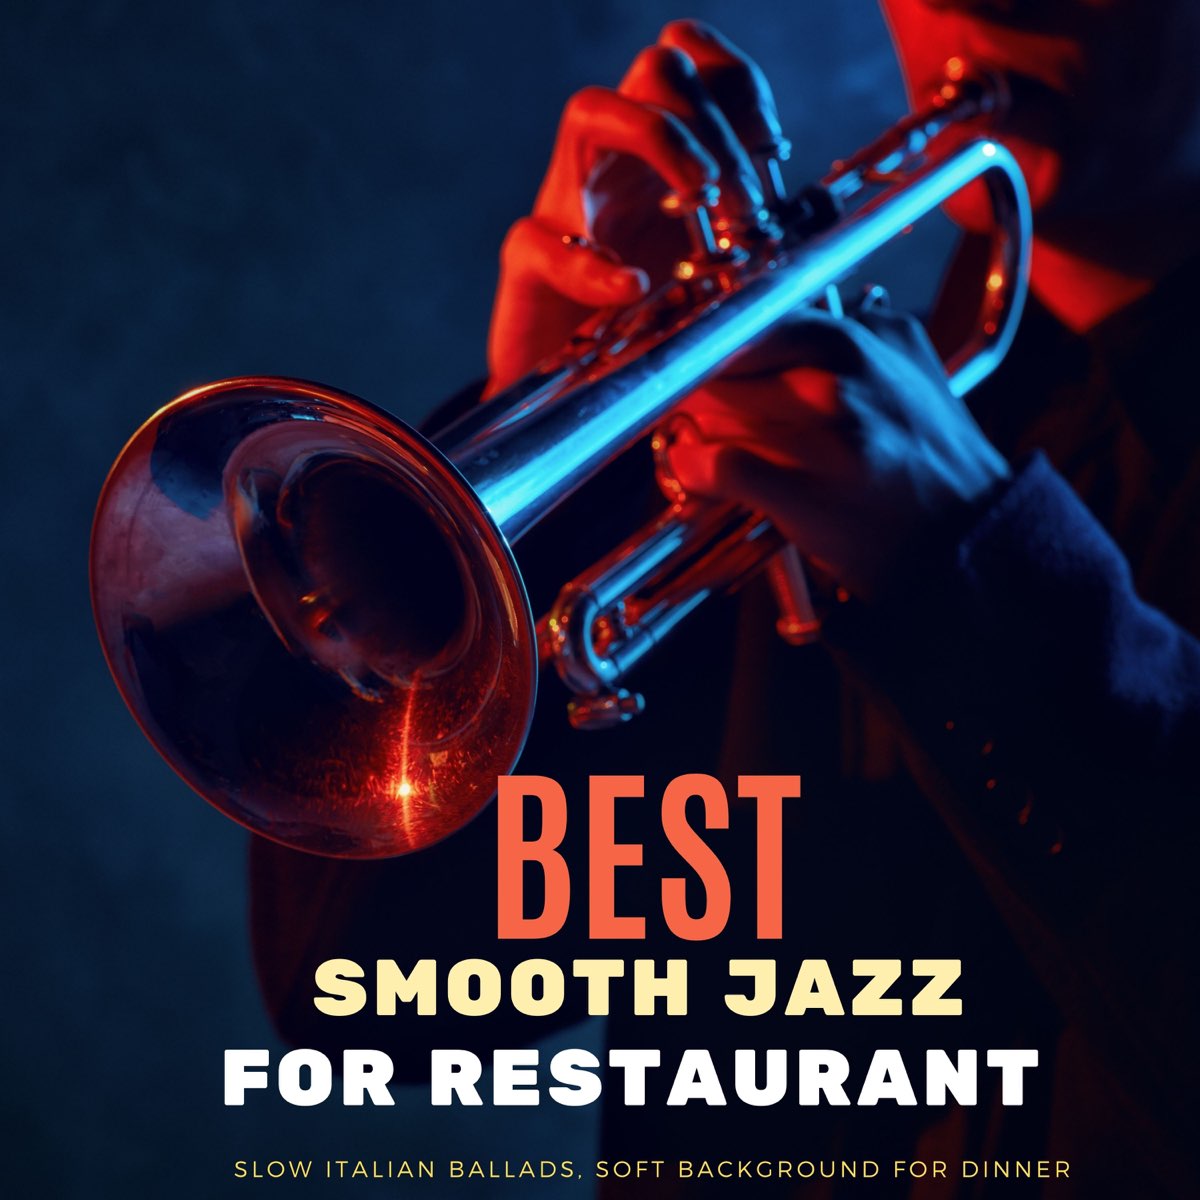 Best Smooth Jazz for Restaurants - Slow Italian Ballads, Soft Background  for Dinner by James Royale on Apple Music